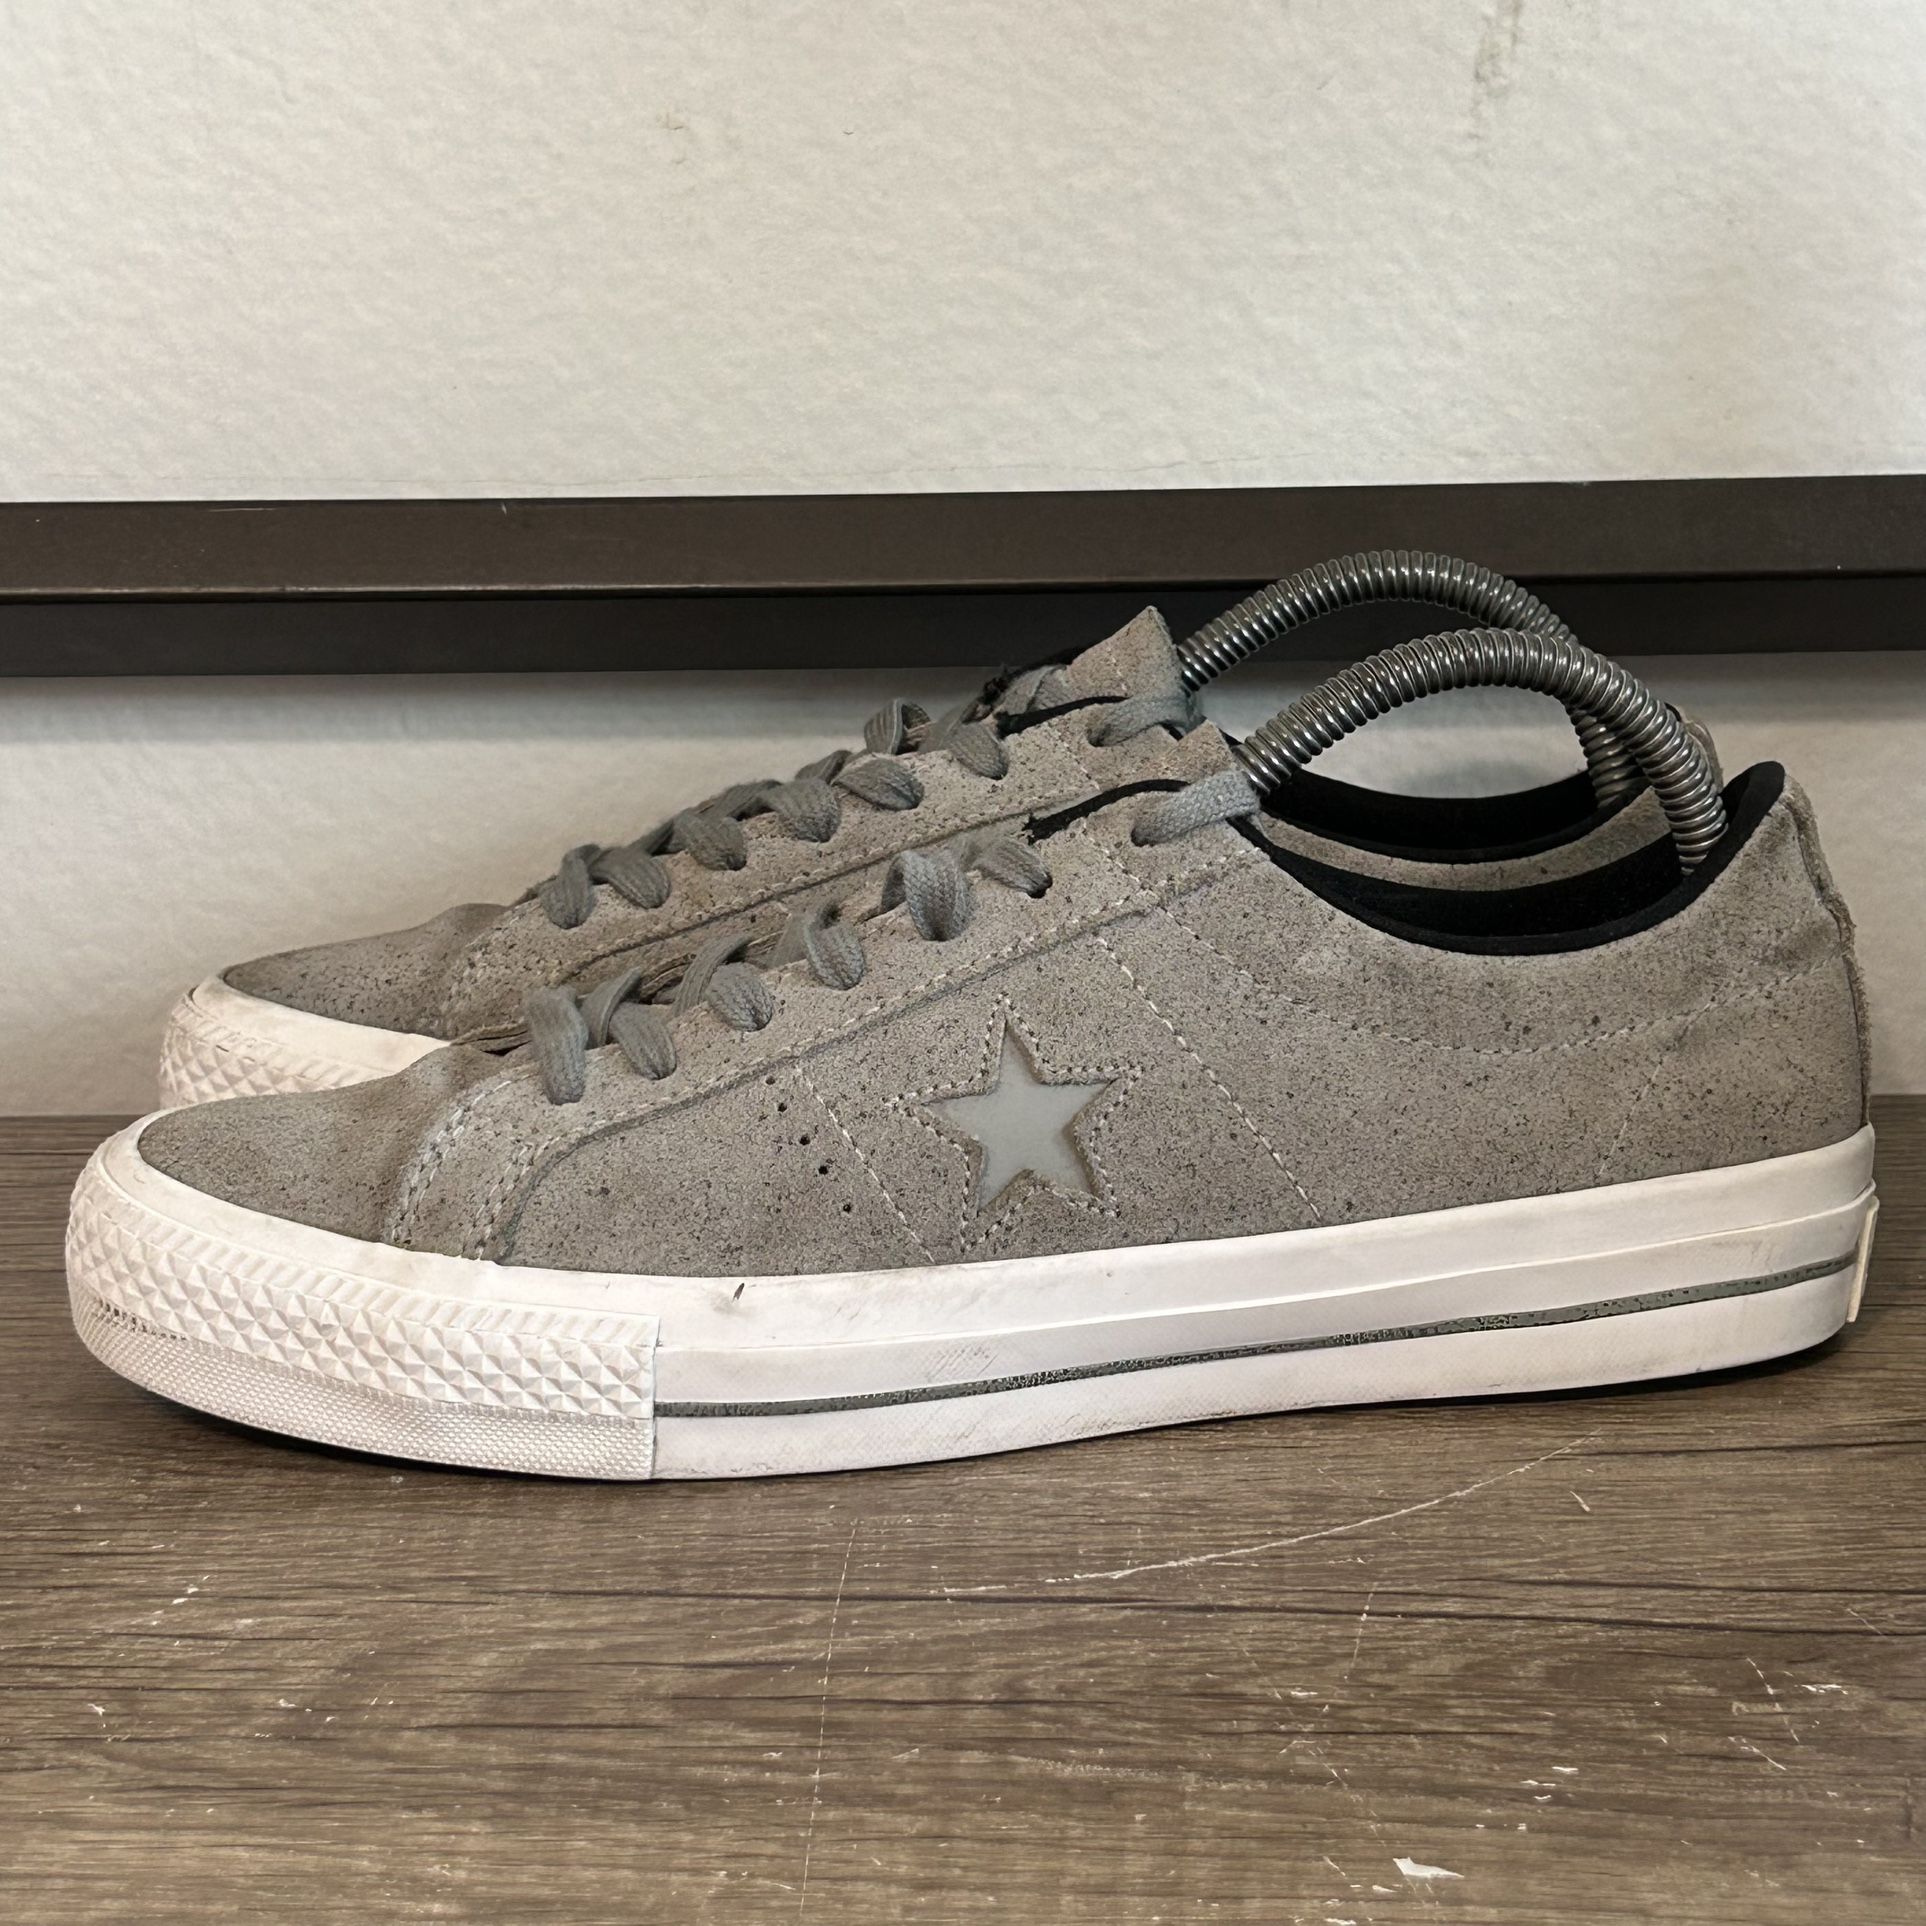 Converse One Star Pro Women’s Shoes Size 9